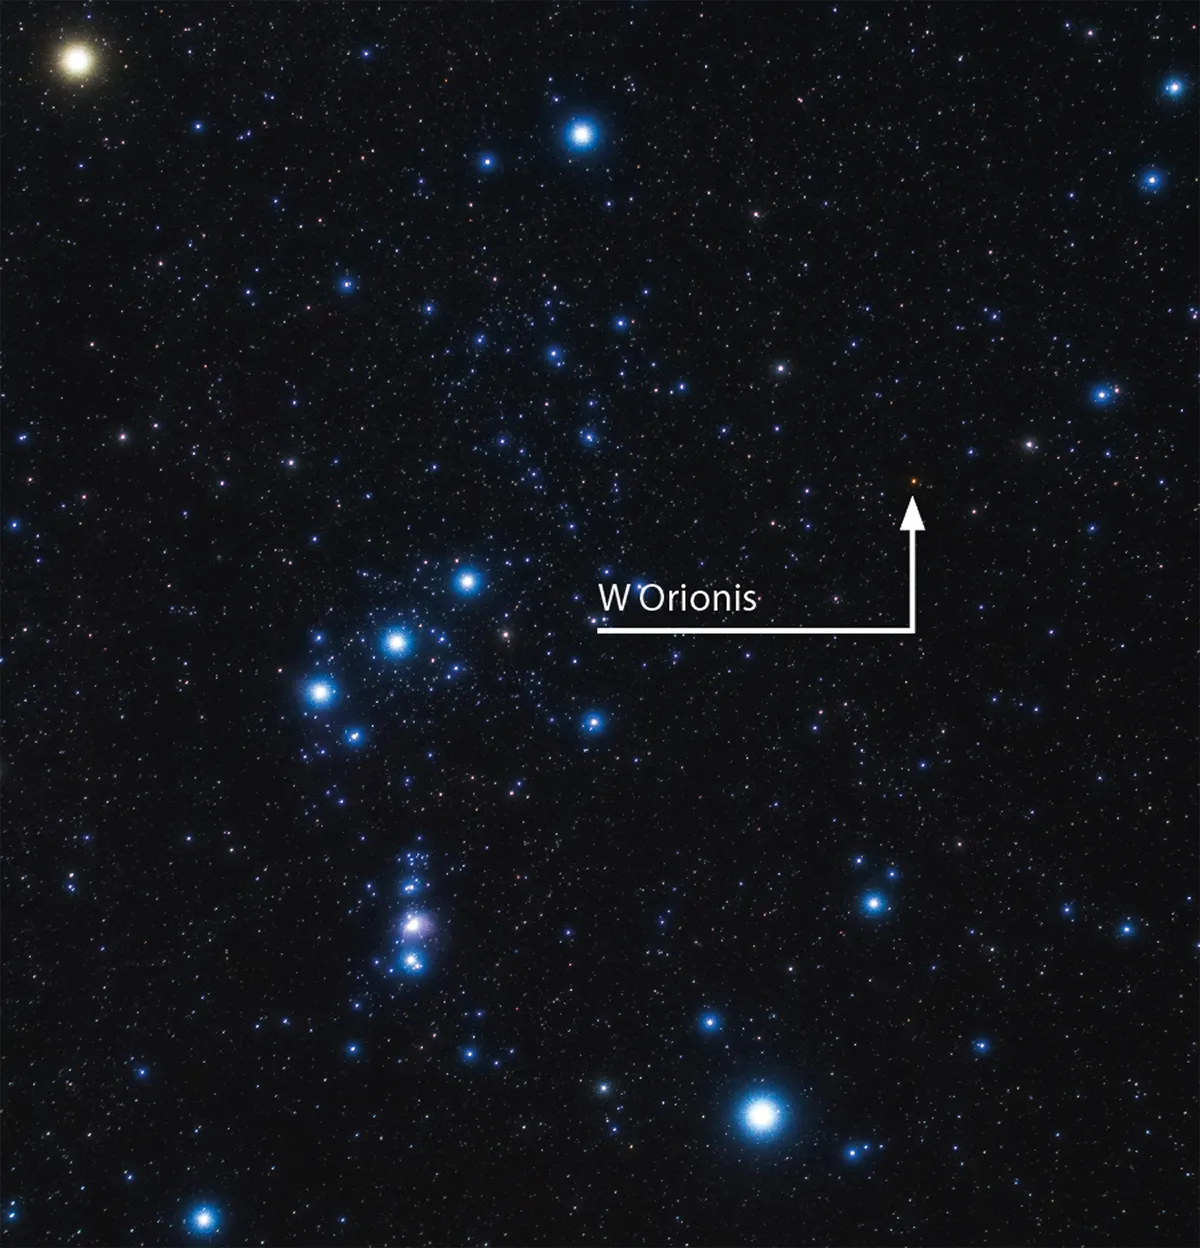 One of the lesser-known winter stars in Orion is W Orionis. Credit: Will Gater